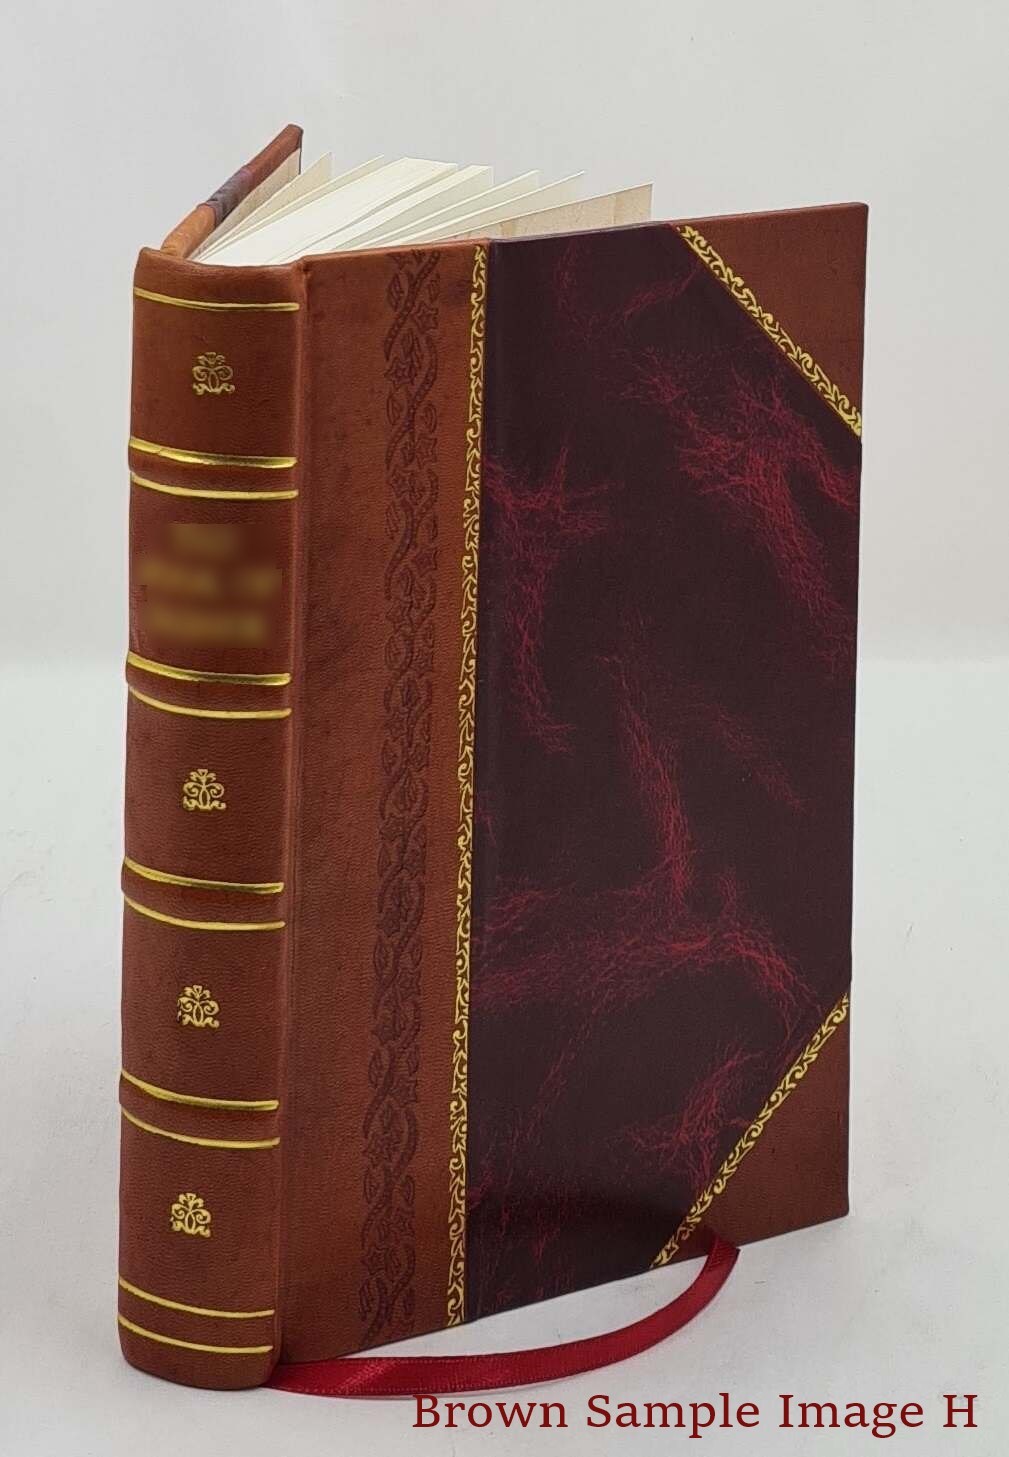 Primary image for The eyes of the world; a novel, by Harold Bell Wright ... with i [Leather Bound]